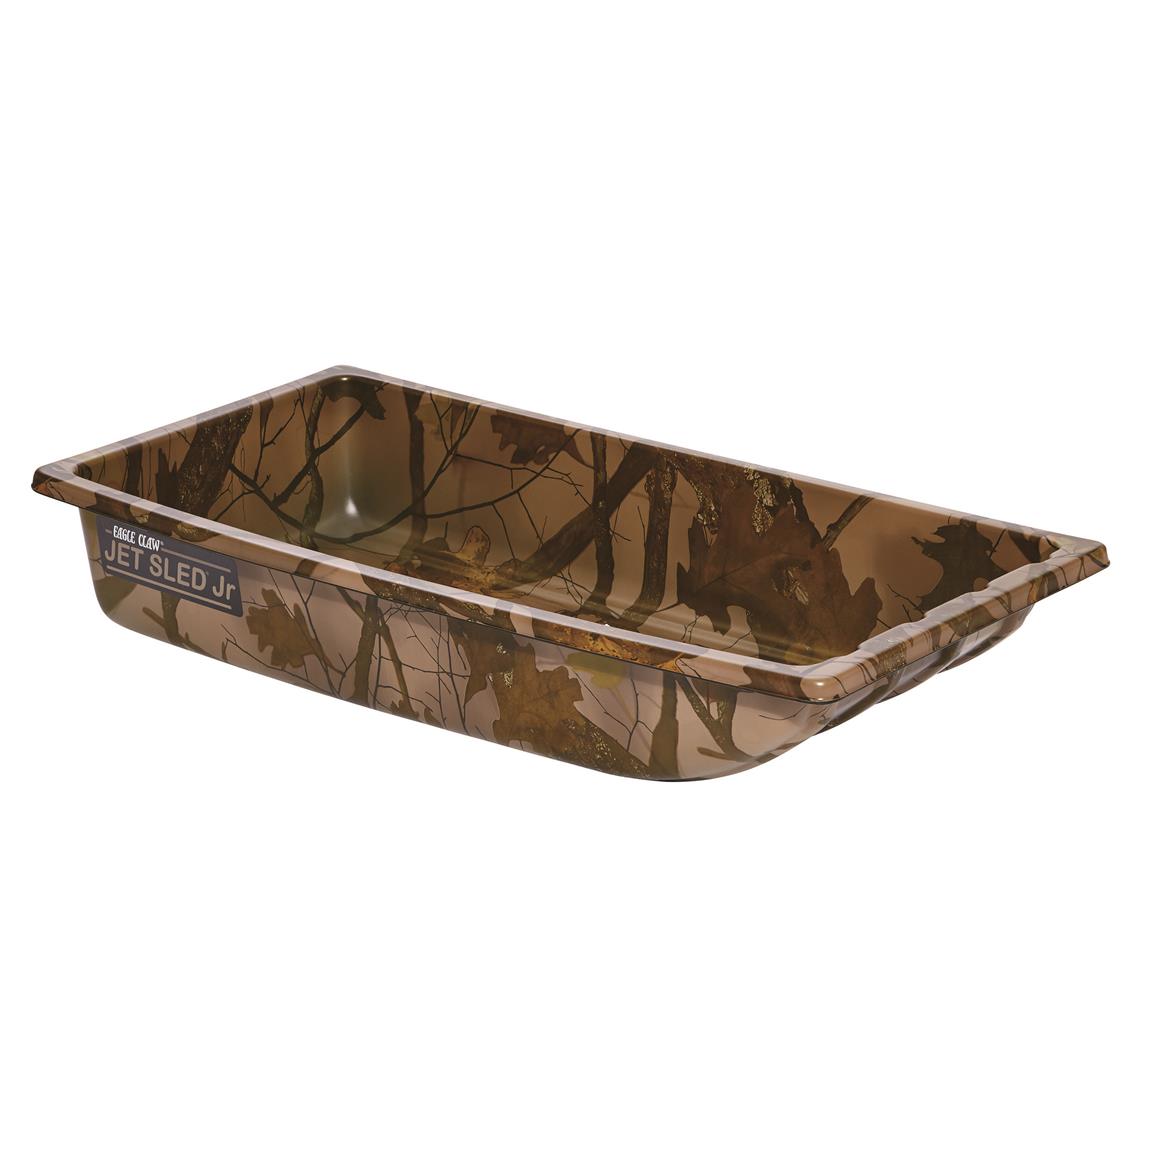 Shappell Ice Fishing Jet Sled Jr., Camo 669912, Ice